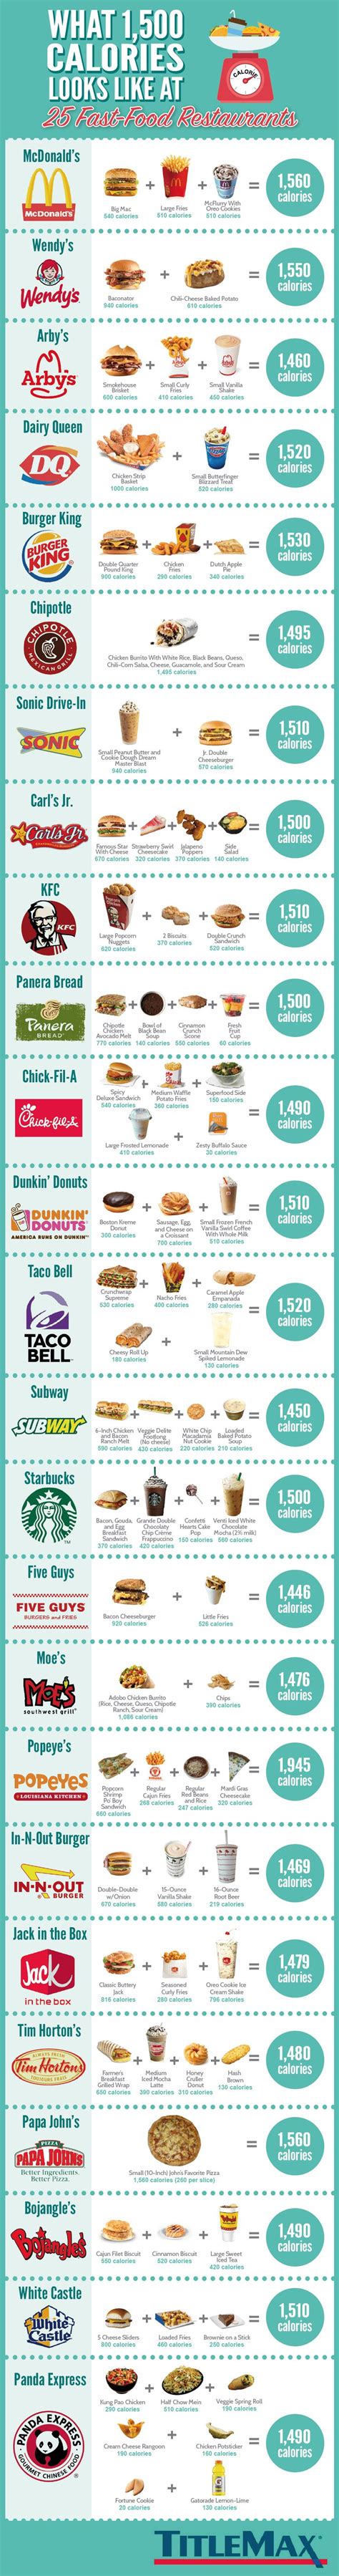 1500 Calories Diet Plan The Fast Food Version Infographic 1500